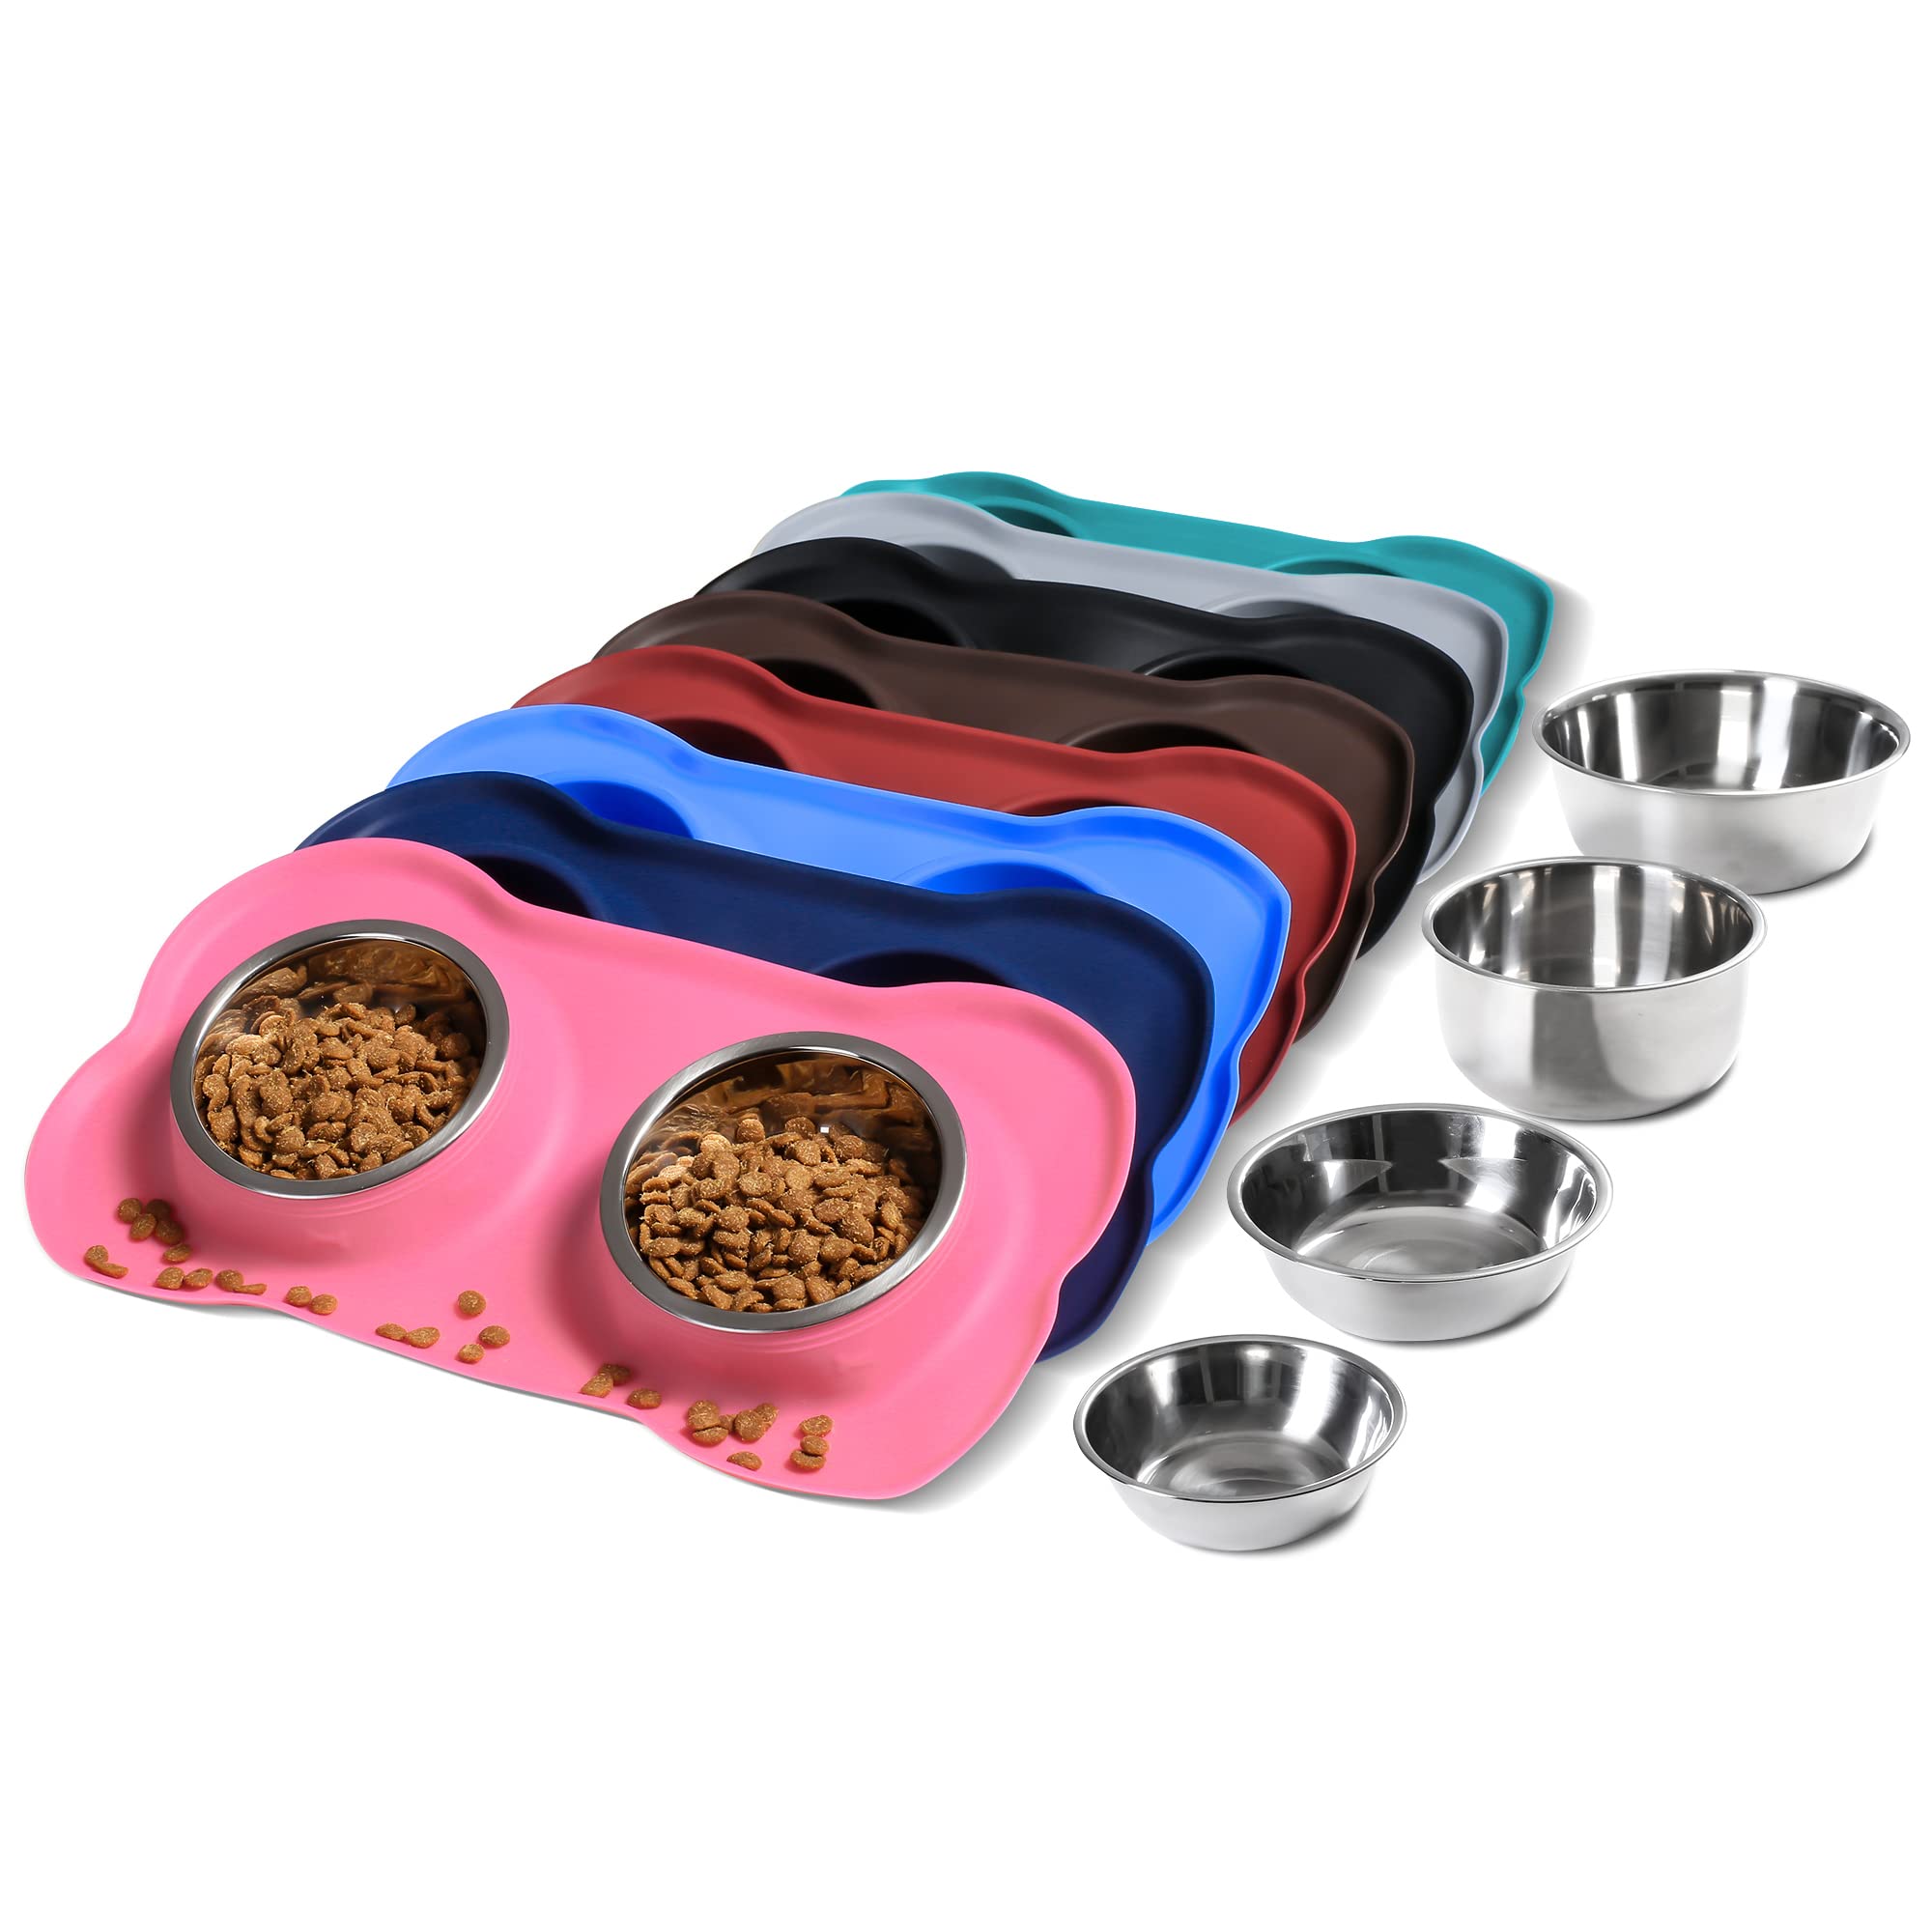 Hubulk Pet Dog Bowls 2 Stainless Steel Dog Bowl with No Spill Non-Skid  Silicone Mat